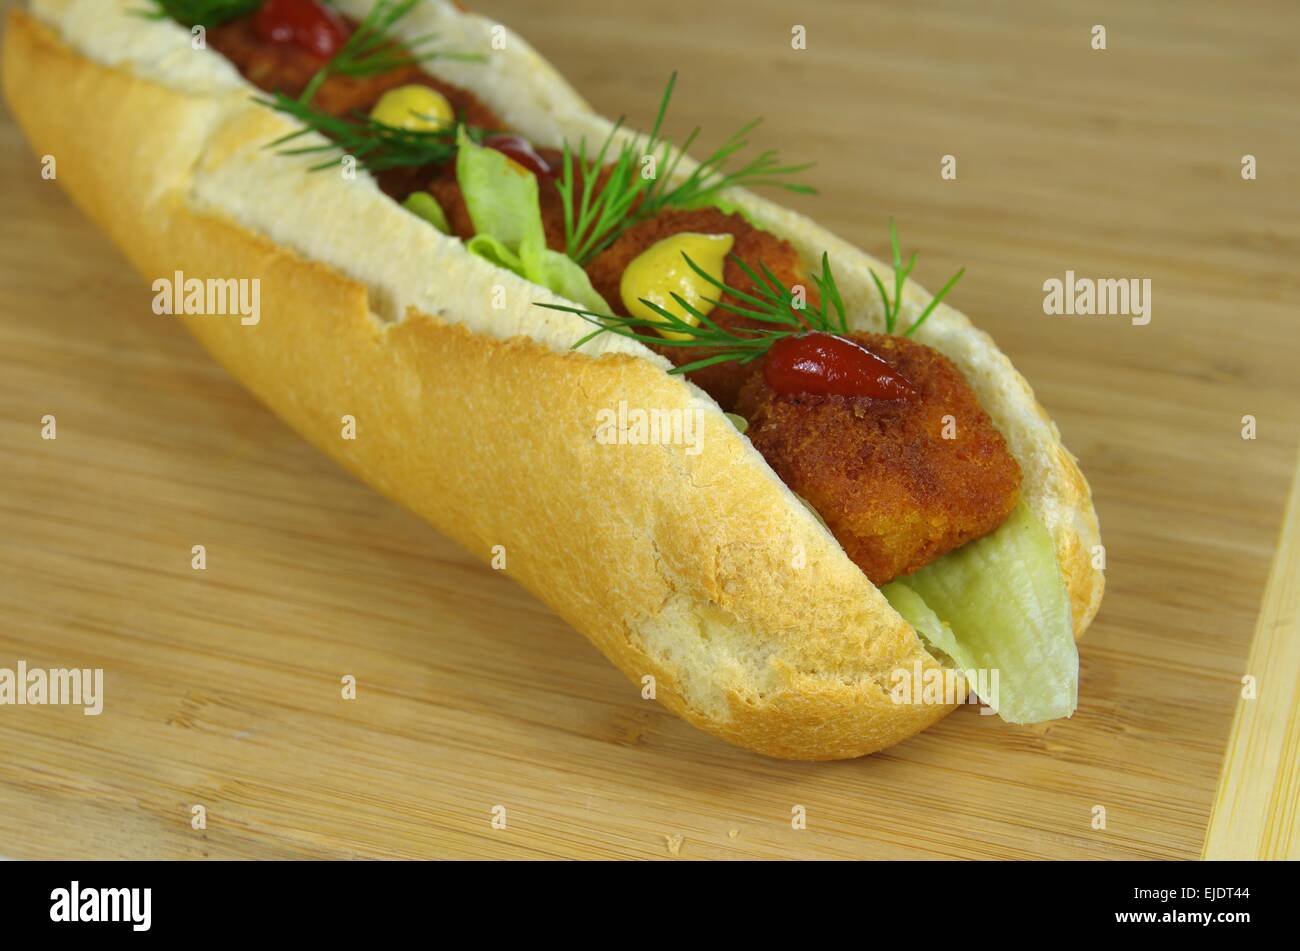 appetizing sandwich with meat and lettuce Stock Photo